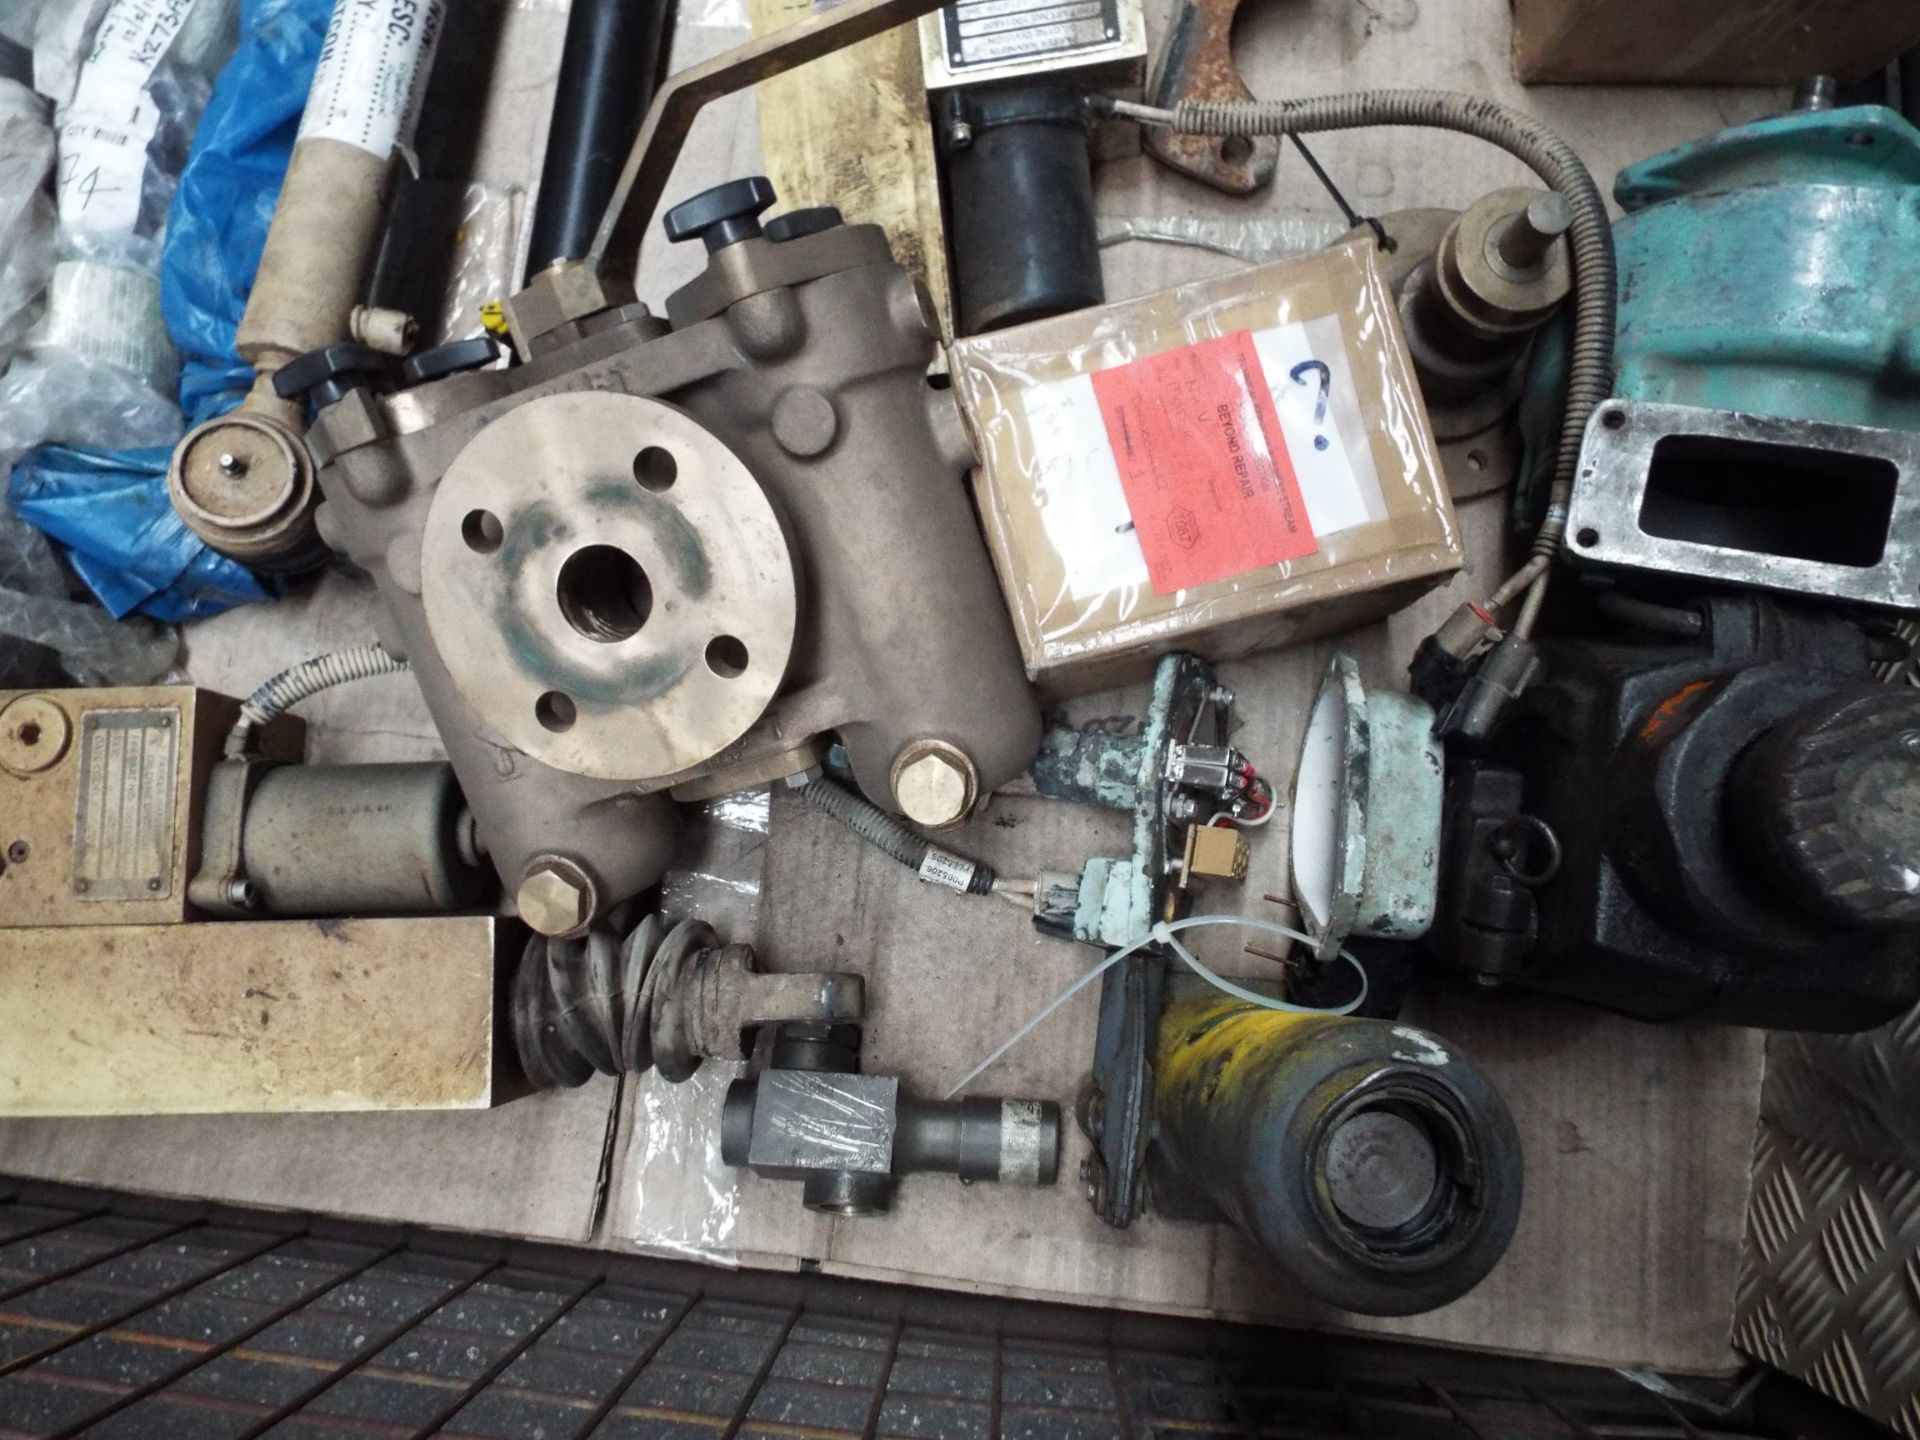 Mixed Stillage of FV Parts consisting of Jacks, Steering Arma, Switches, Valve etc - Image 6 of 9